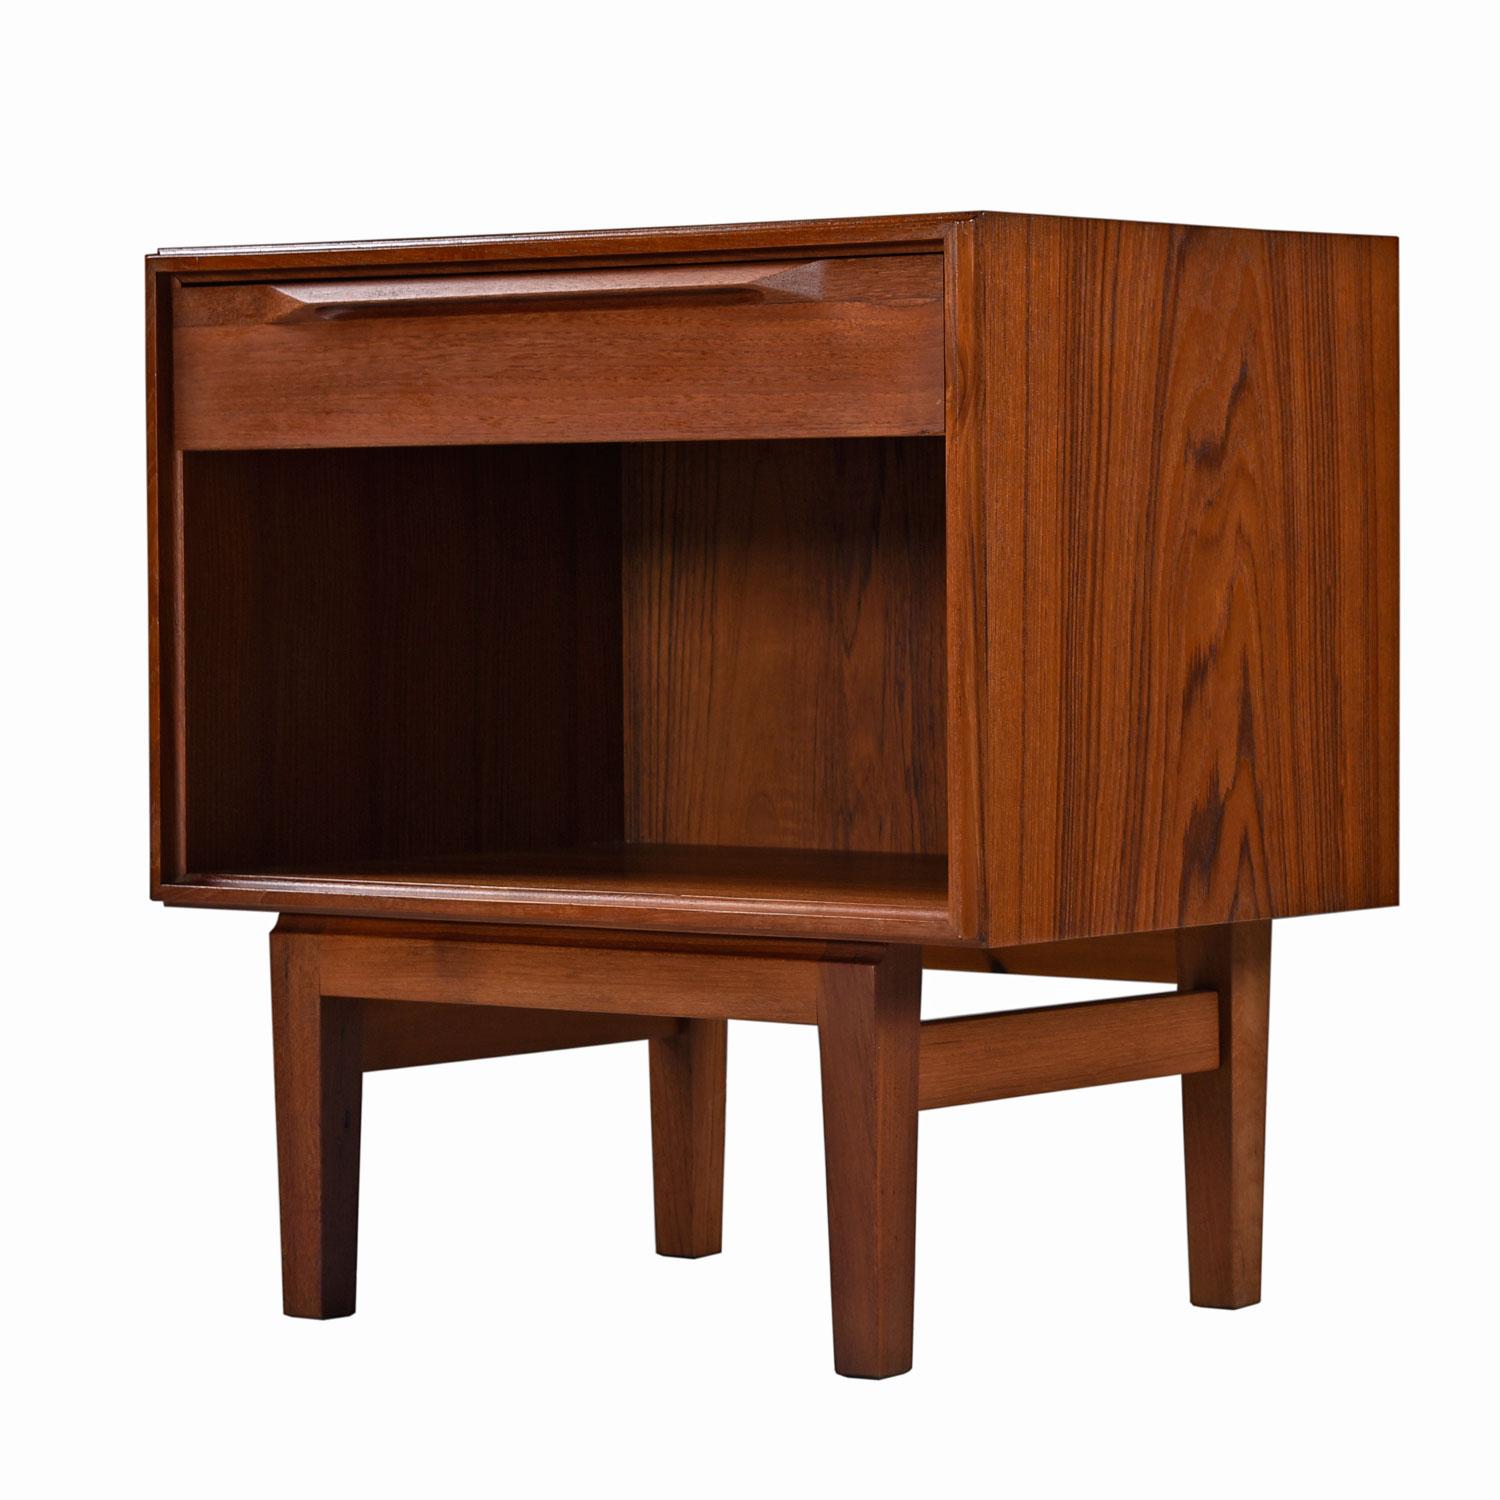 Our restoration team spent many hours restoring these nightstands to like-new condition. There isn't a scratch to be found. 

Expertly crafted Mid-Century Modern Danish teak nightstands by Ib Kofod-Larsen for Fredericia Moblefabrik. These are an